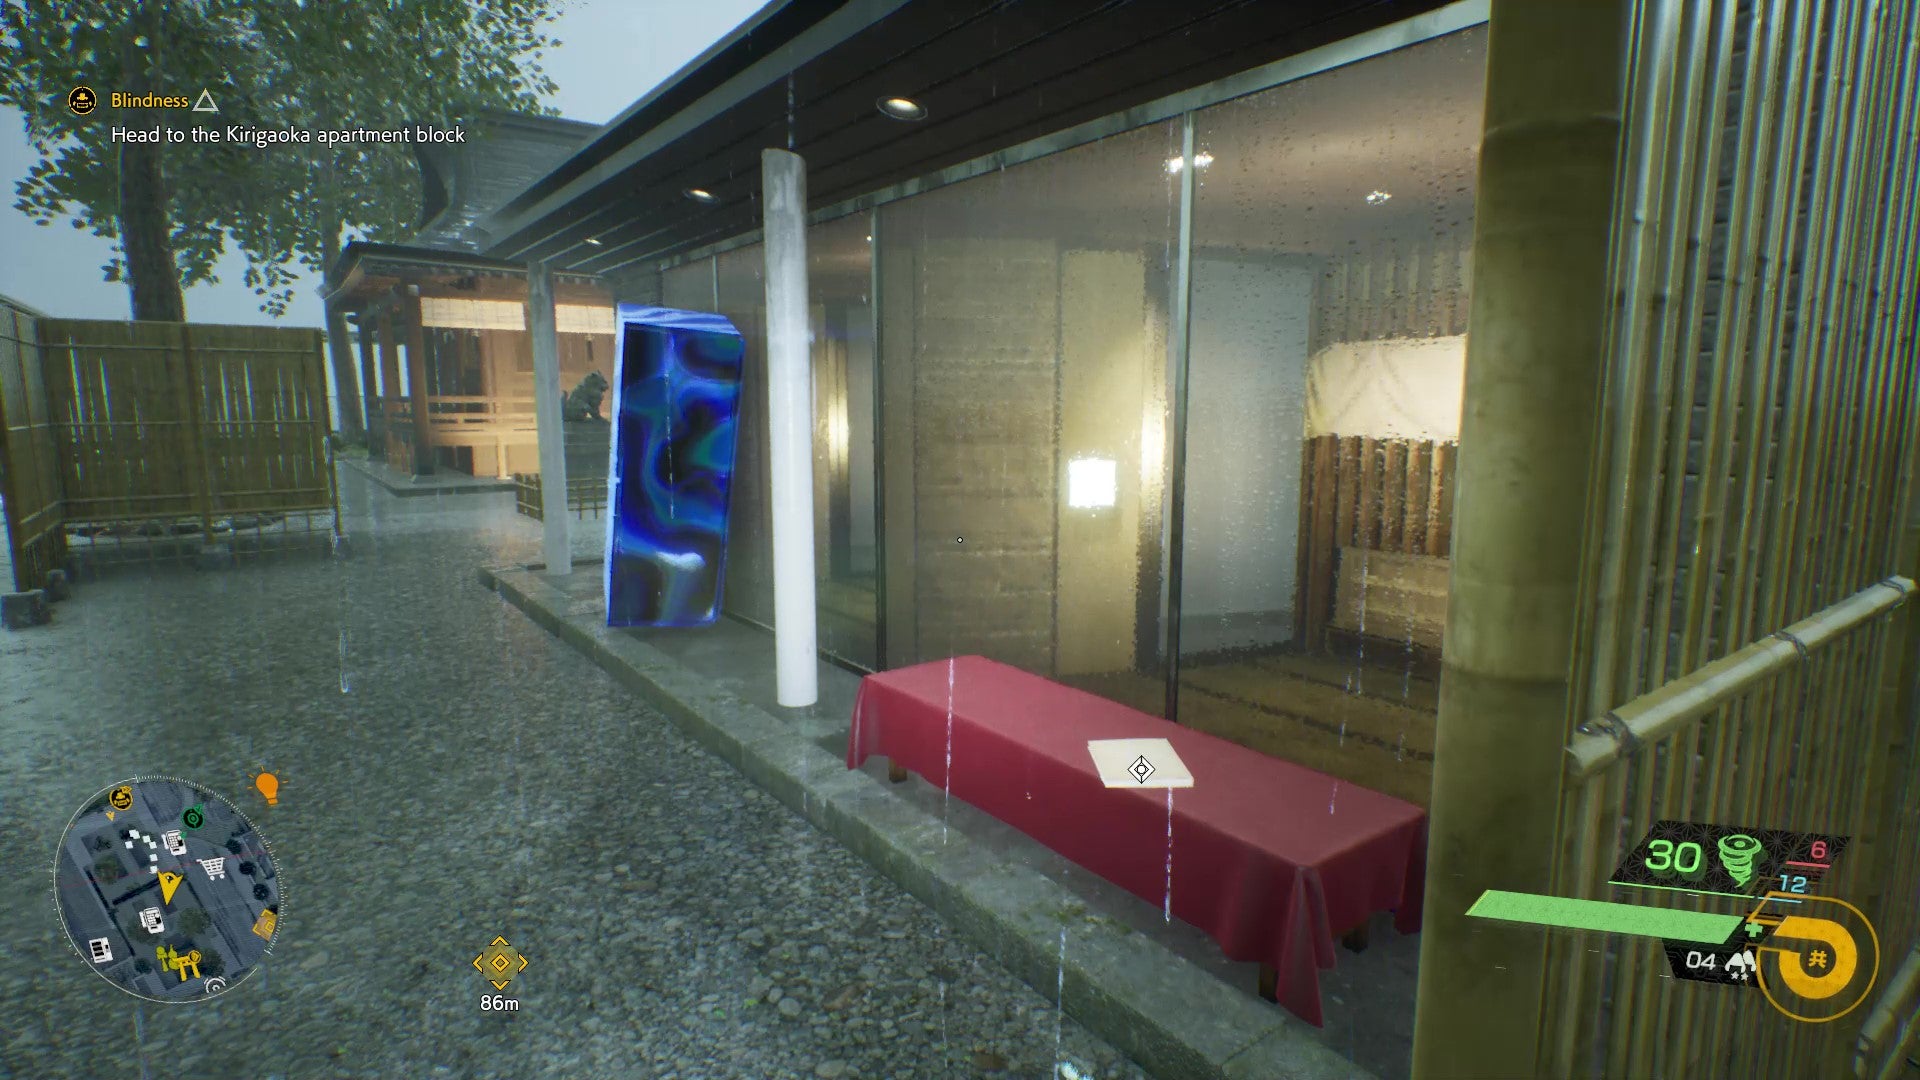 A screenshot showing the location of "The Dancing Headless Students" KK investigation note in Ghostwire: Tokyo.